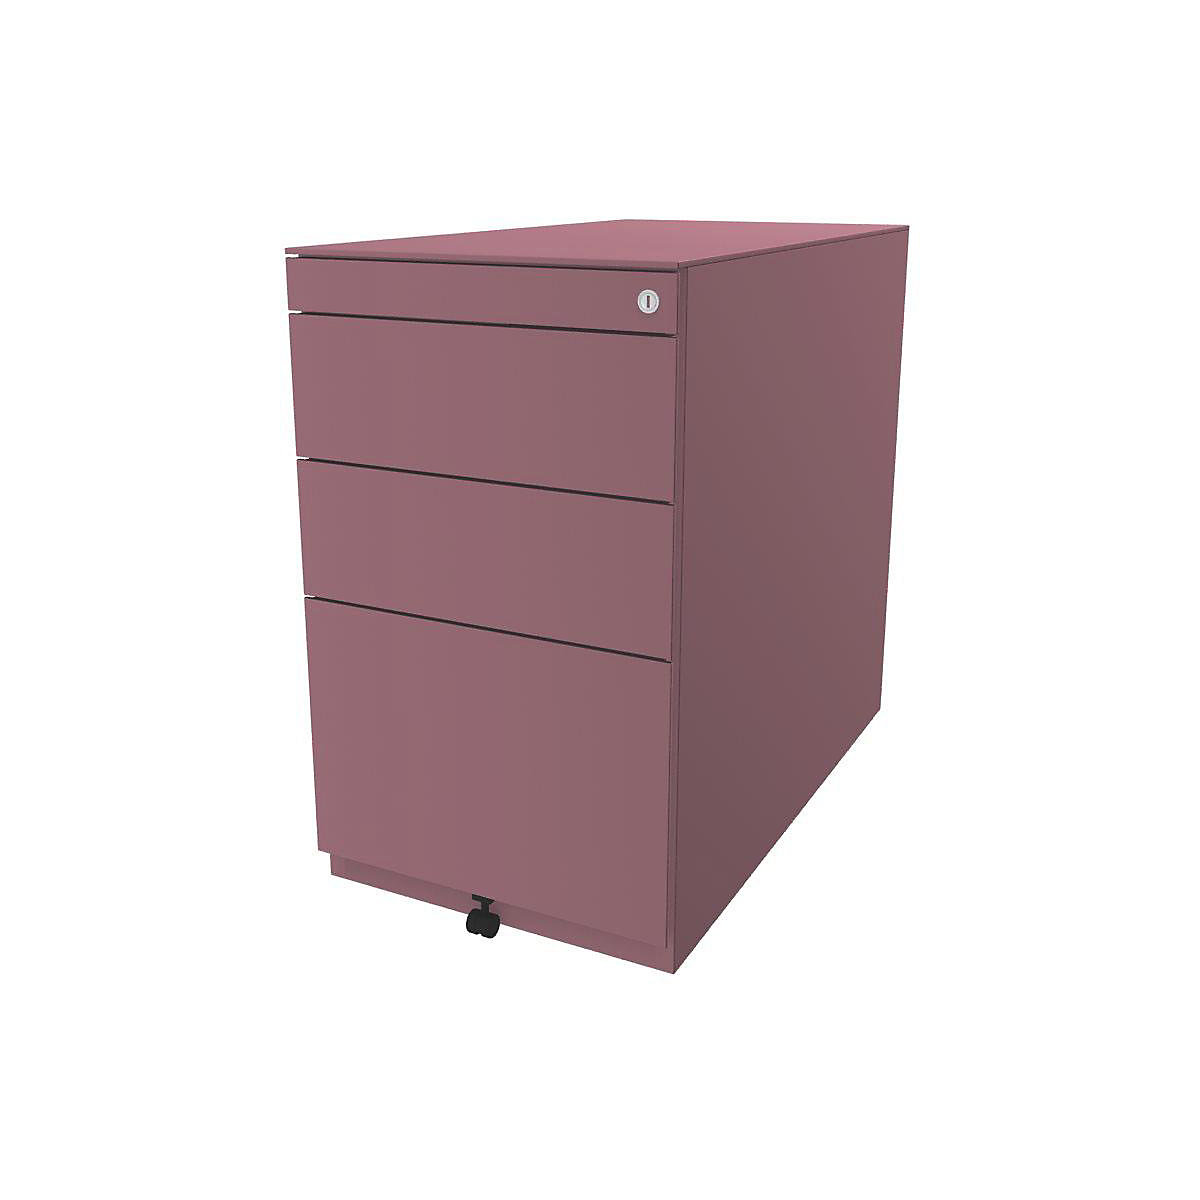 Note™ fixed pedestal, with 2 universal drawers, 1 suspension file drawer – BISLEY, with top, depth 775 mm, pink-14